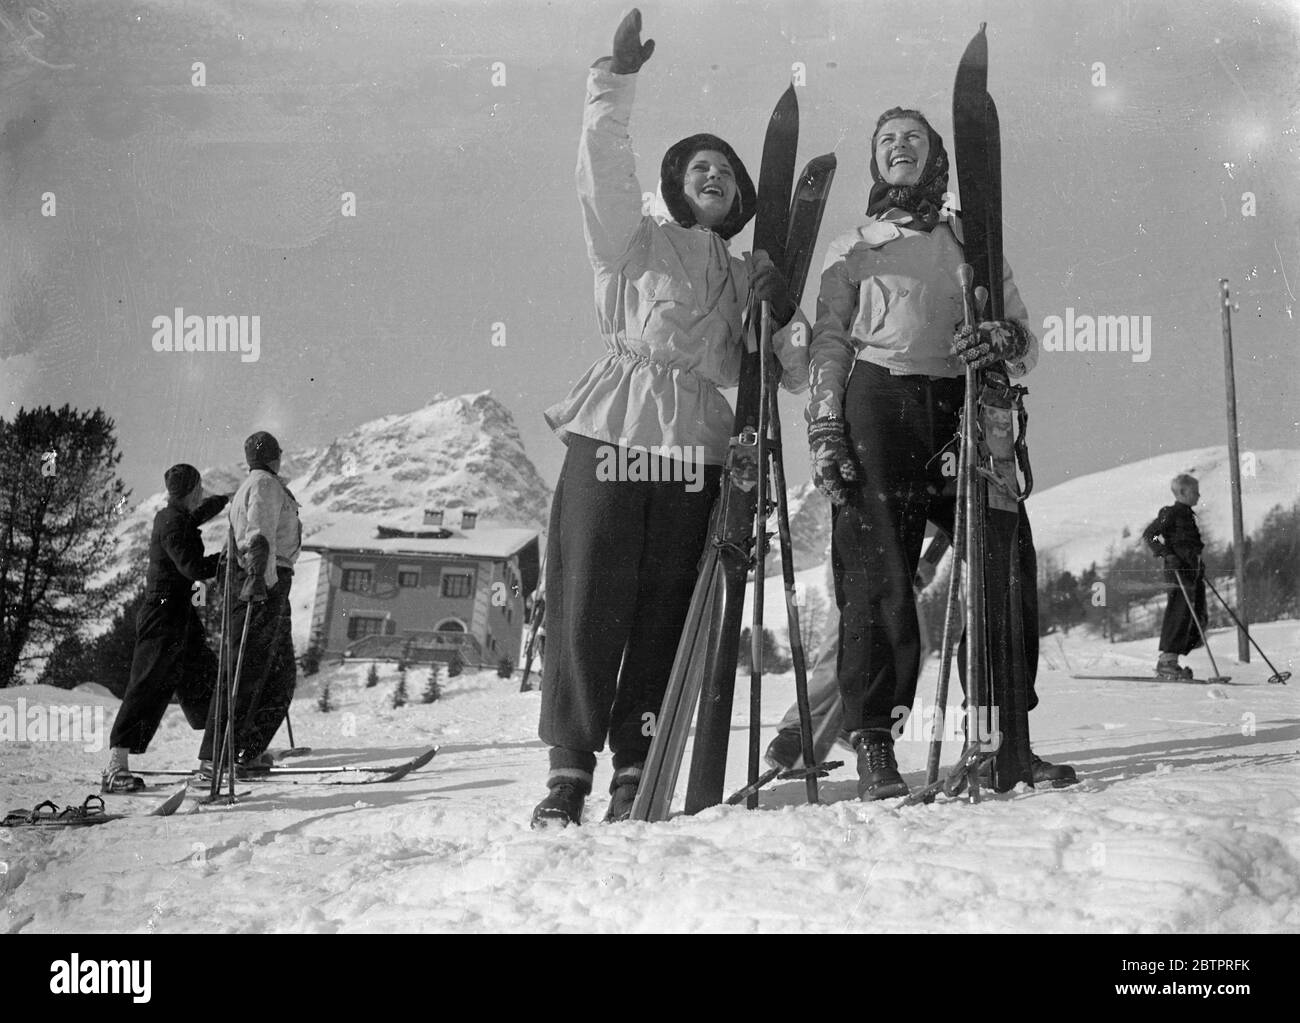 hail to the snow!. Two girls skiers send a laughing welcome across the snow as they set out for the mornings sport at St Moritz, Switzerland. They are Miss Eleanor Crocket of Hopedale, Massachusetts (USA) and Miss Elizabeth Schiltz , from Canton, Ohio. 30 December 1937 Stock Photo